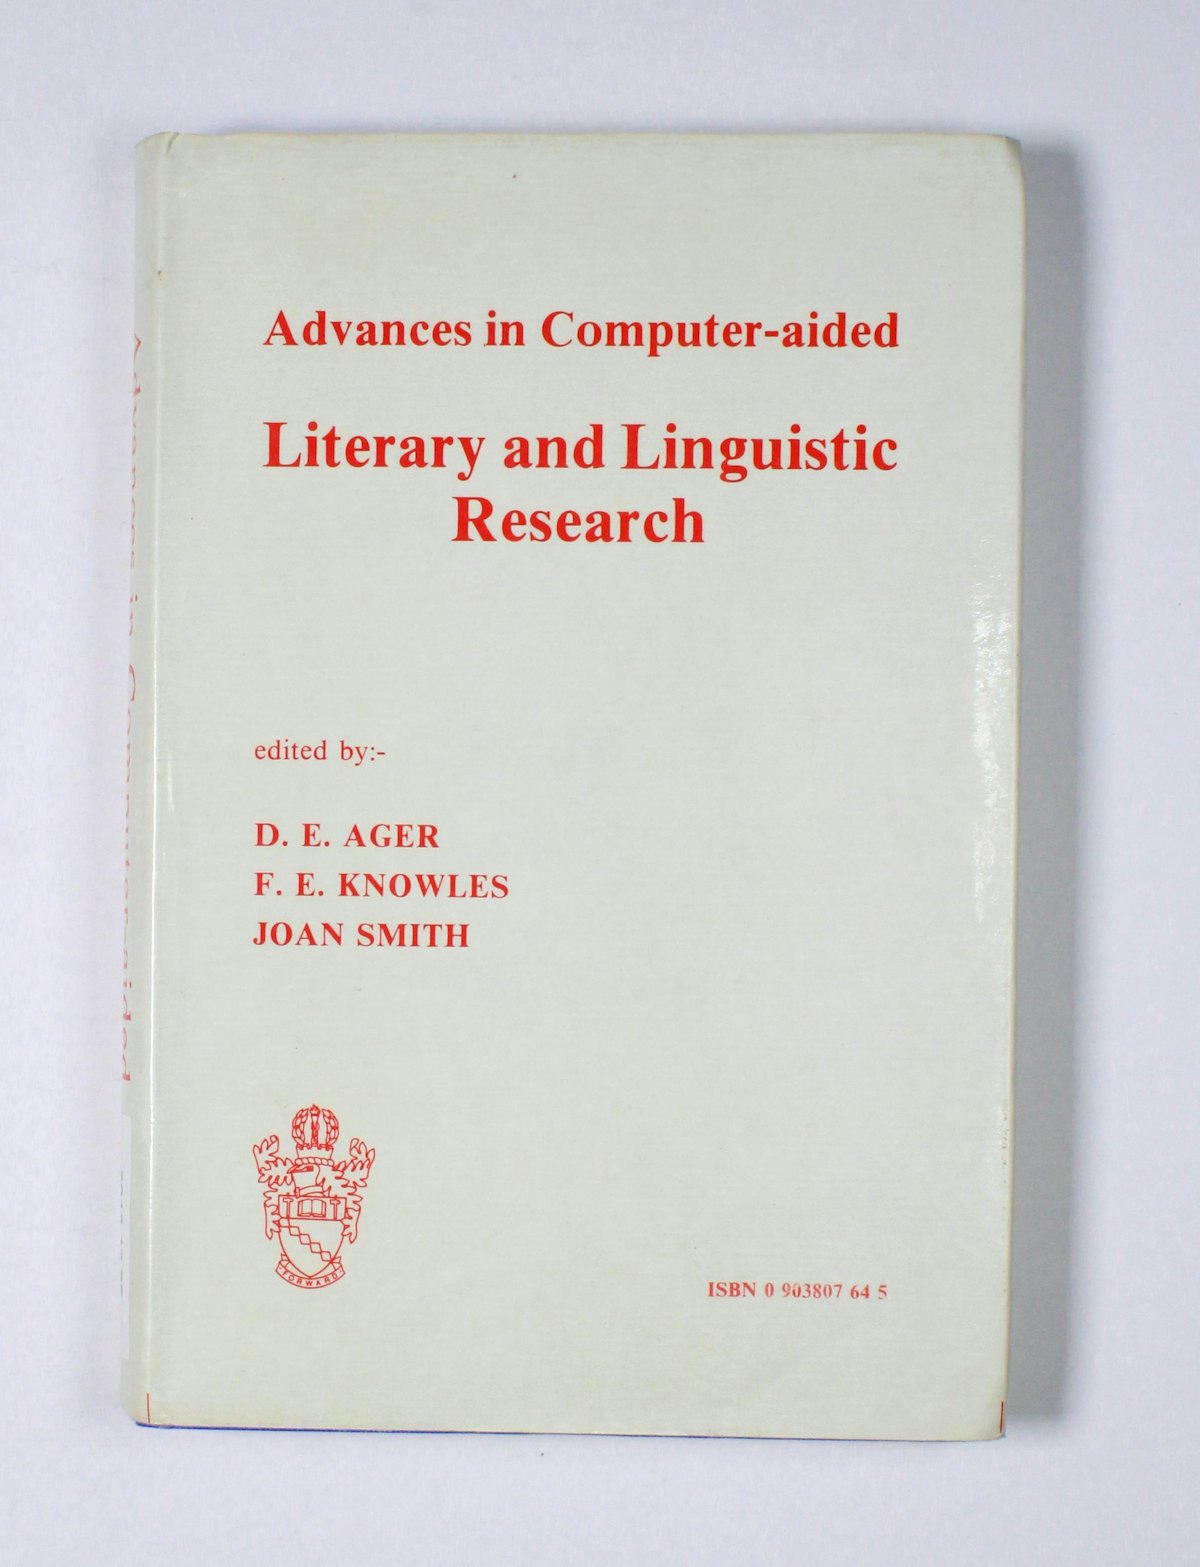 Advances in Computer-aided Literary and Linguistic Research